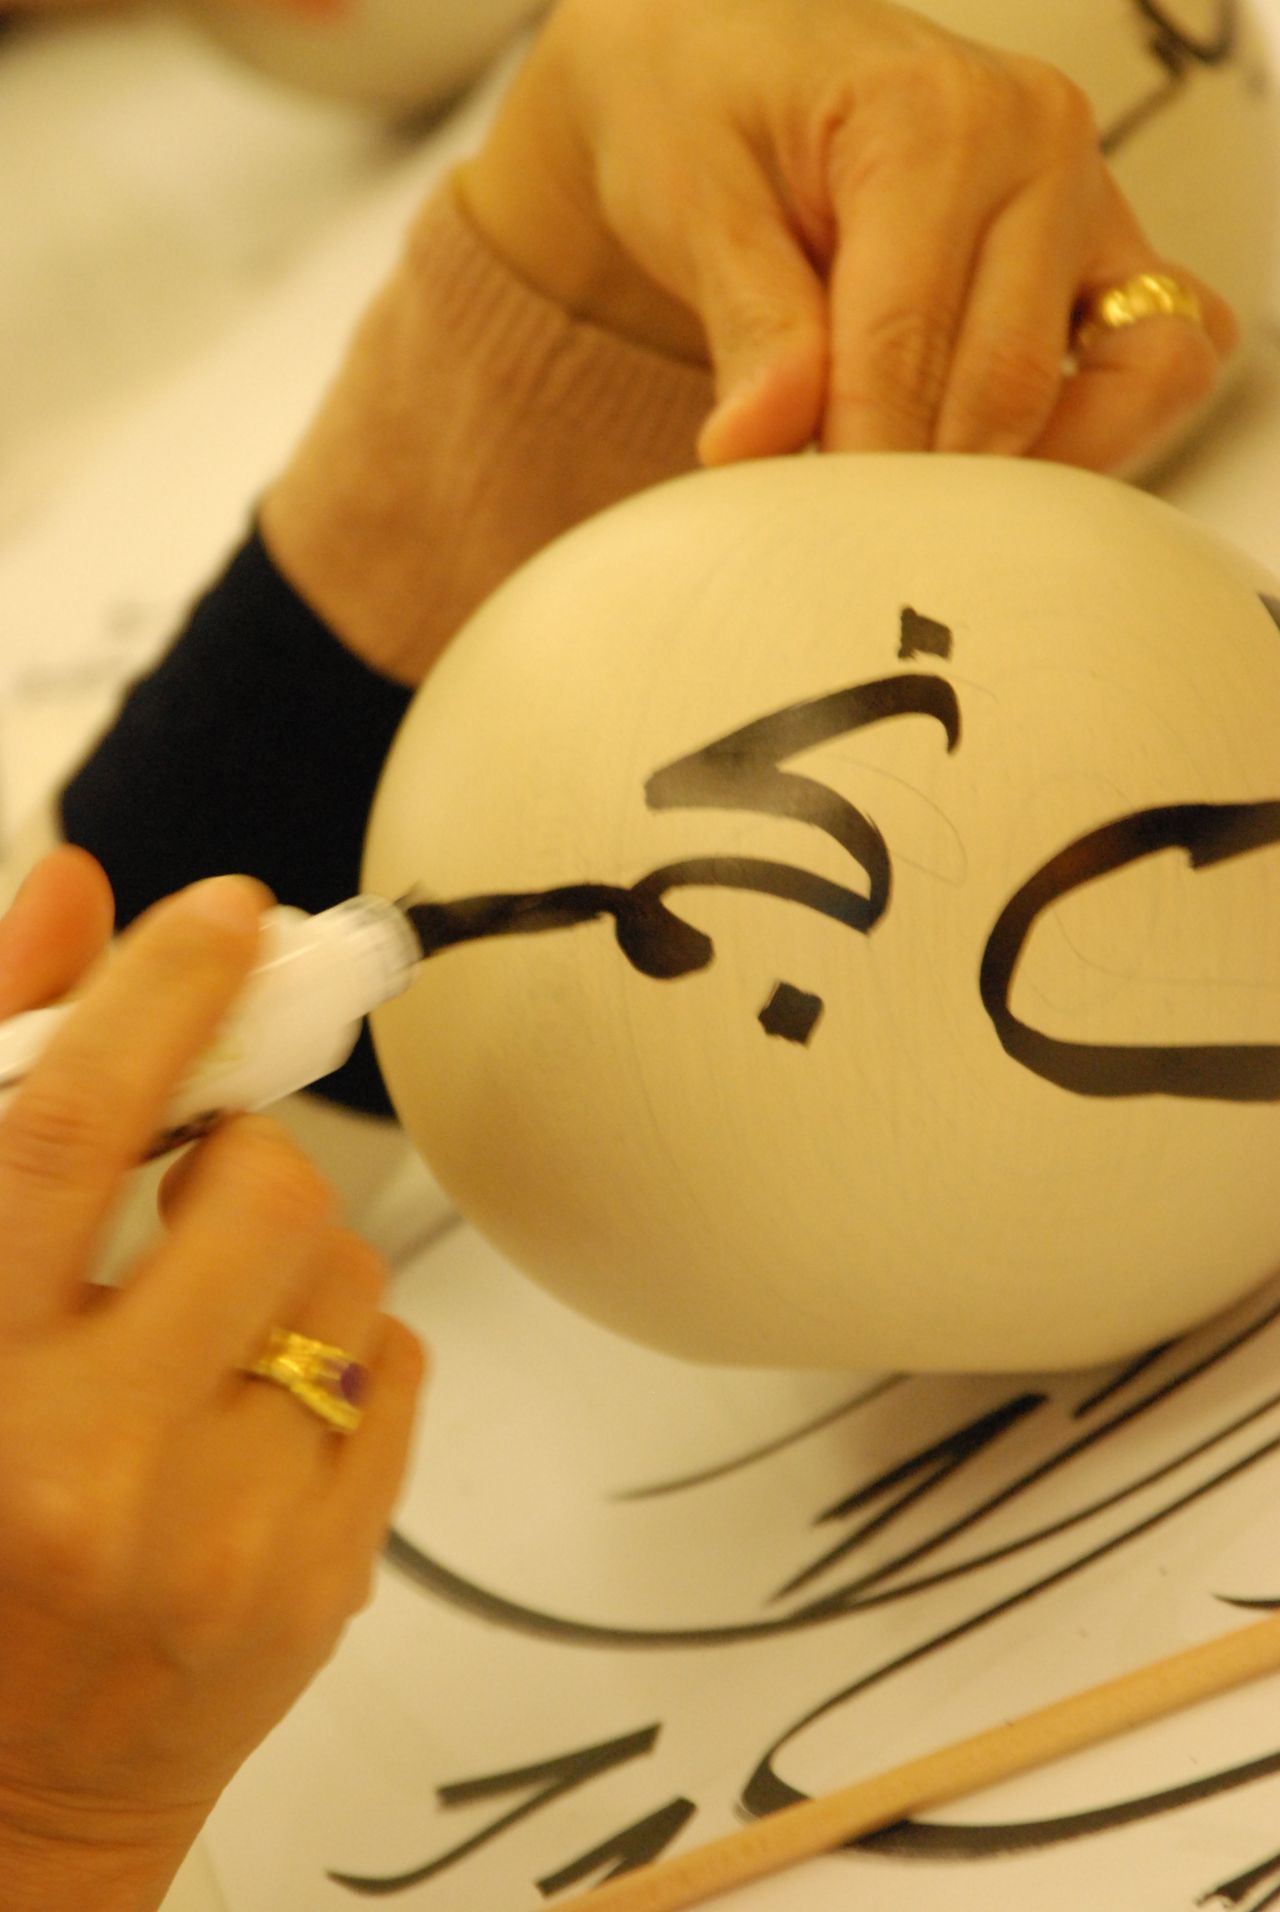 Three hundred women at sessions around Saudi Arabia wrote their names on maplewood balls for Al-Dowayan's "Esmi (My Name)," which challenges the Saudi taboo that prevents men from saying the names of women in their lives.